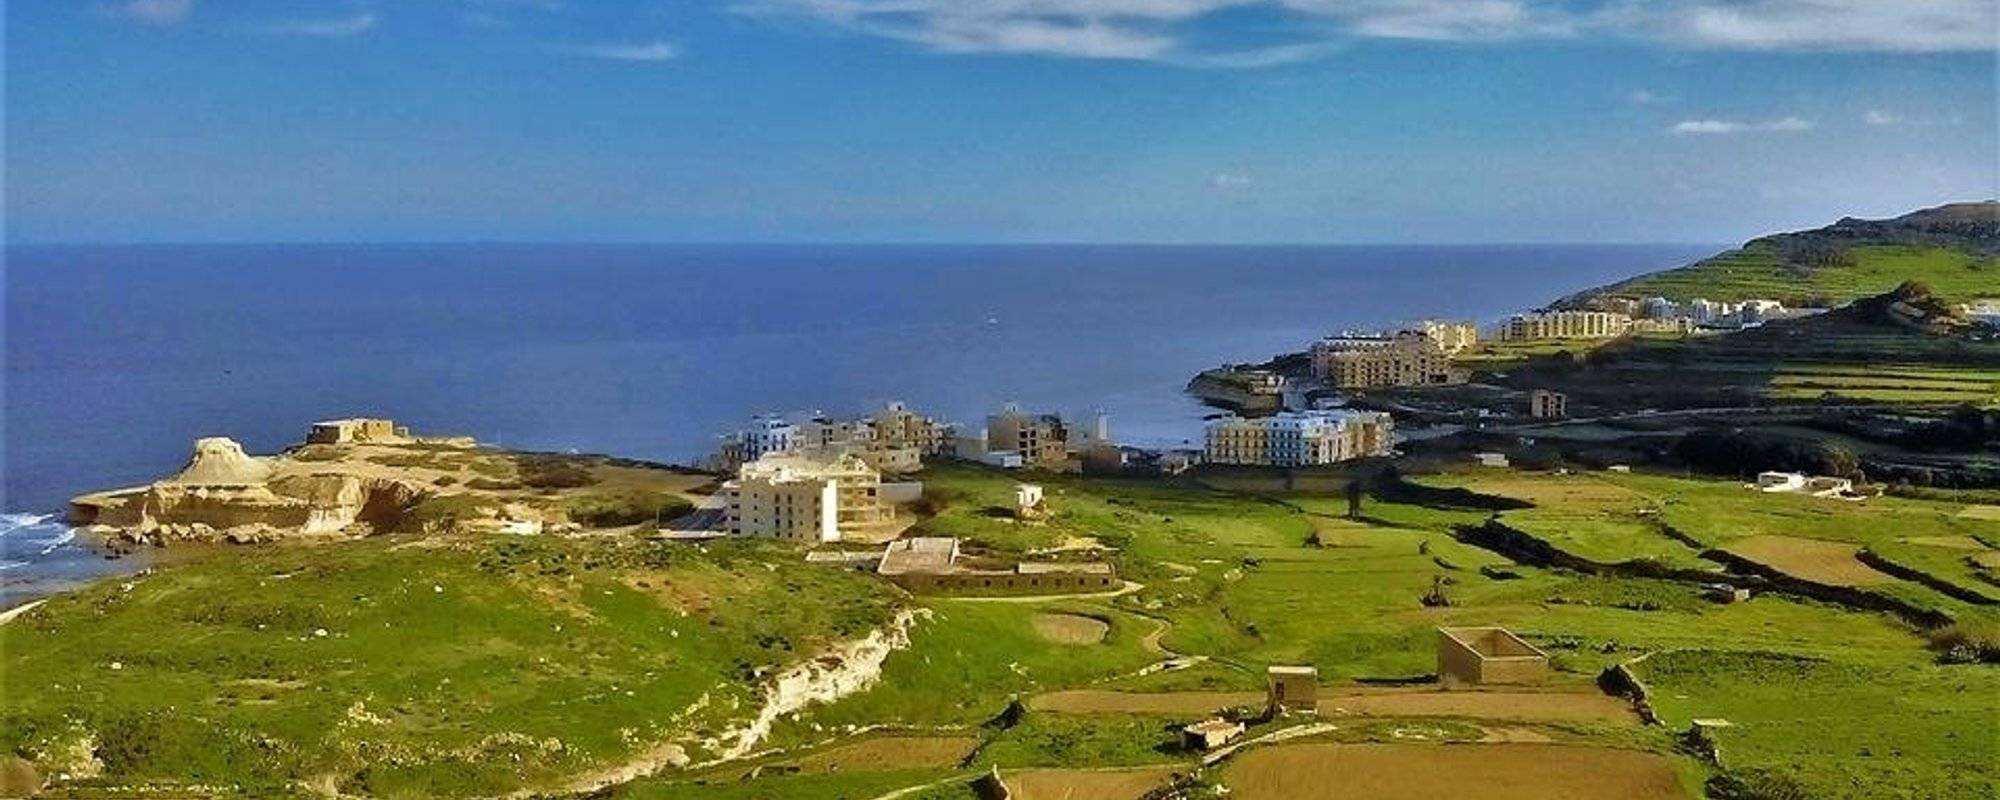 Landscape Photography: beauty of Marsalforn, pearl of the Maltese island of Gozo